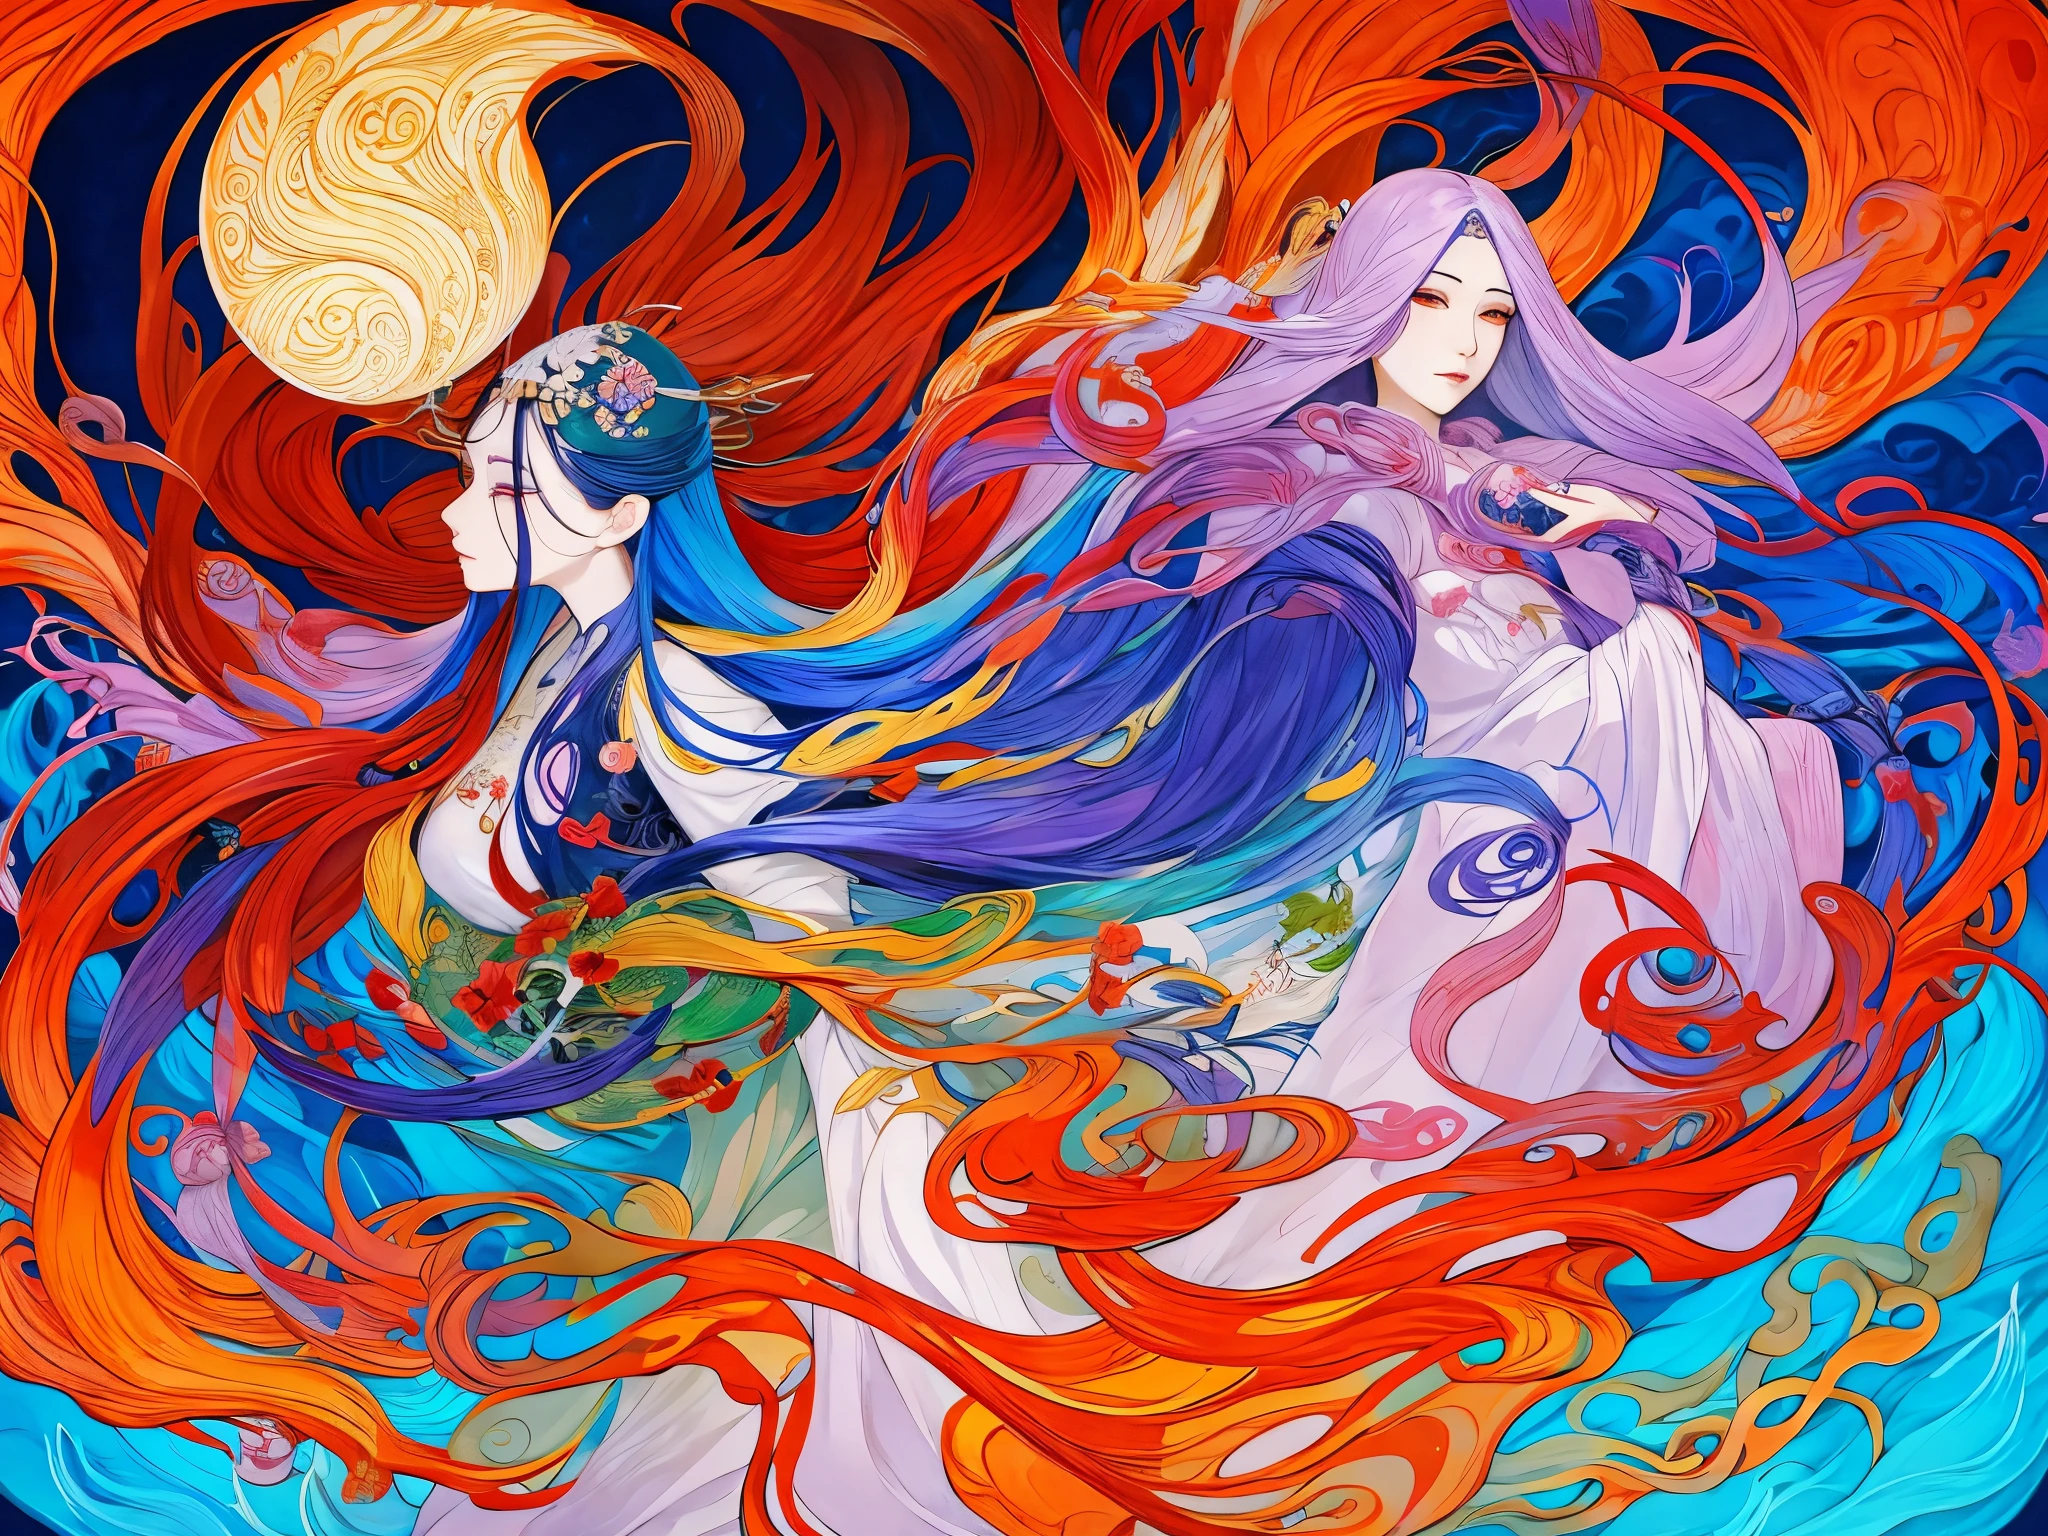 a painting of a woman with long hair and a flower in her hand, korean art nouveau anime, japanese goddess, flowing hair and long robes, anime fantasy illustration, inspired by Sōami, akira from chinese mythology, japanese art style, a beautiful kitsune woman, inspired by Nōami, inspired by Tsukioka Yoshitoshi, autumnal empress